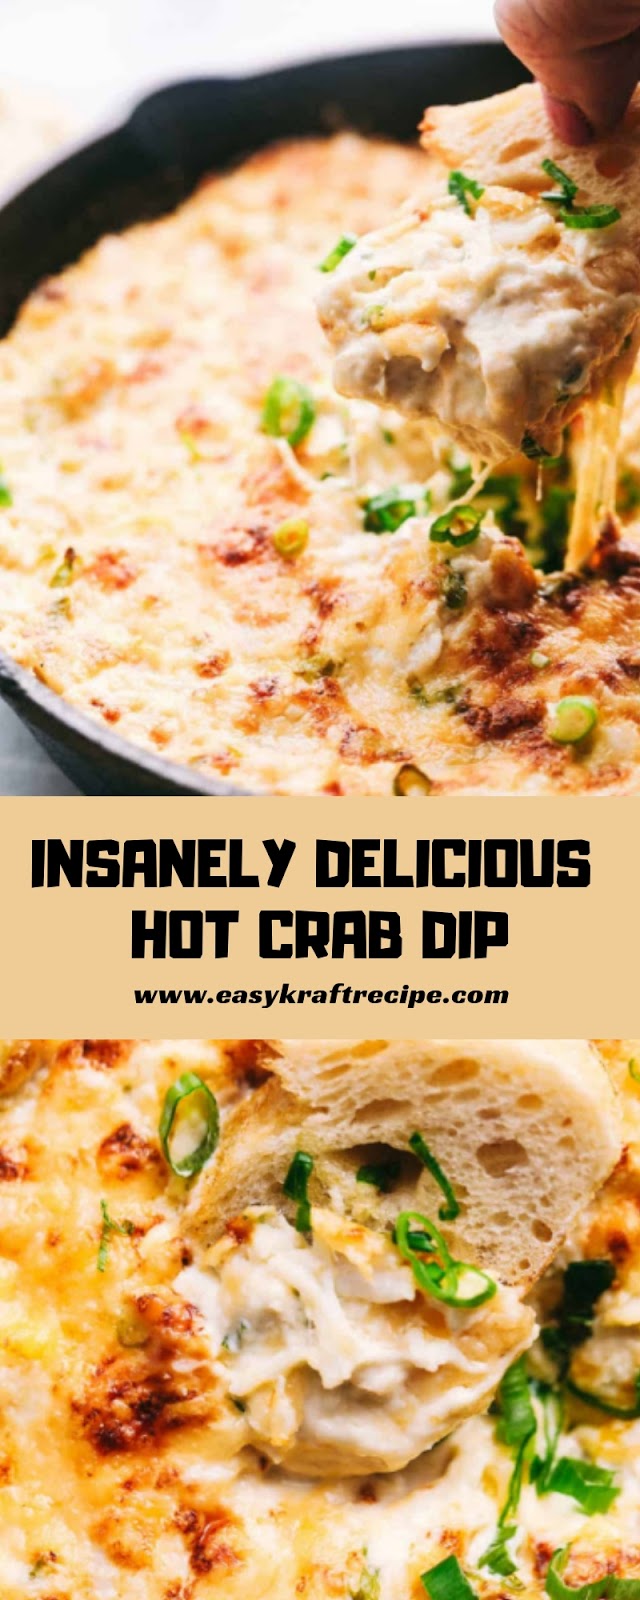 INSANELY DELICIOUS HOT CRAB DIP